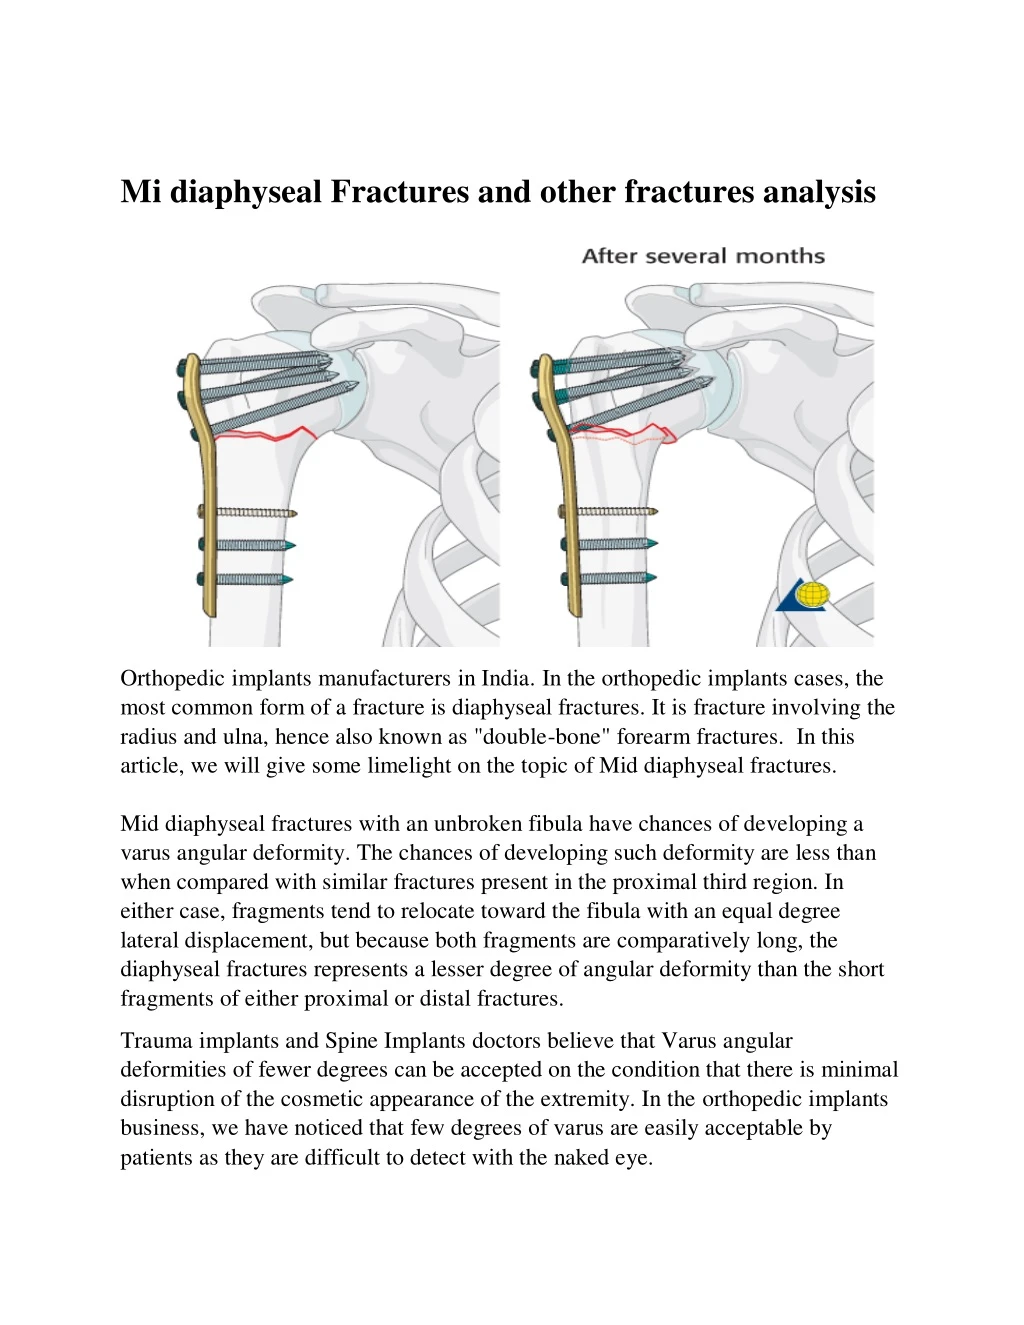 mi diaphyseal fractures and other fractures